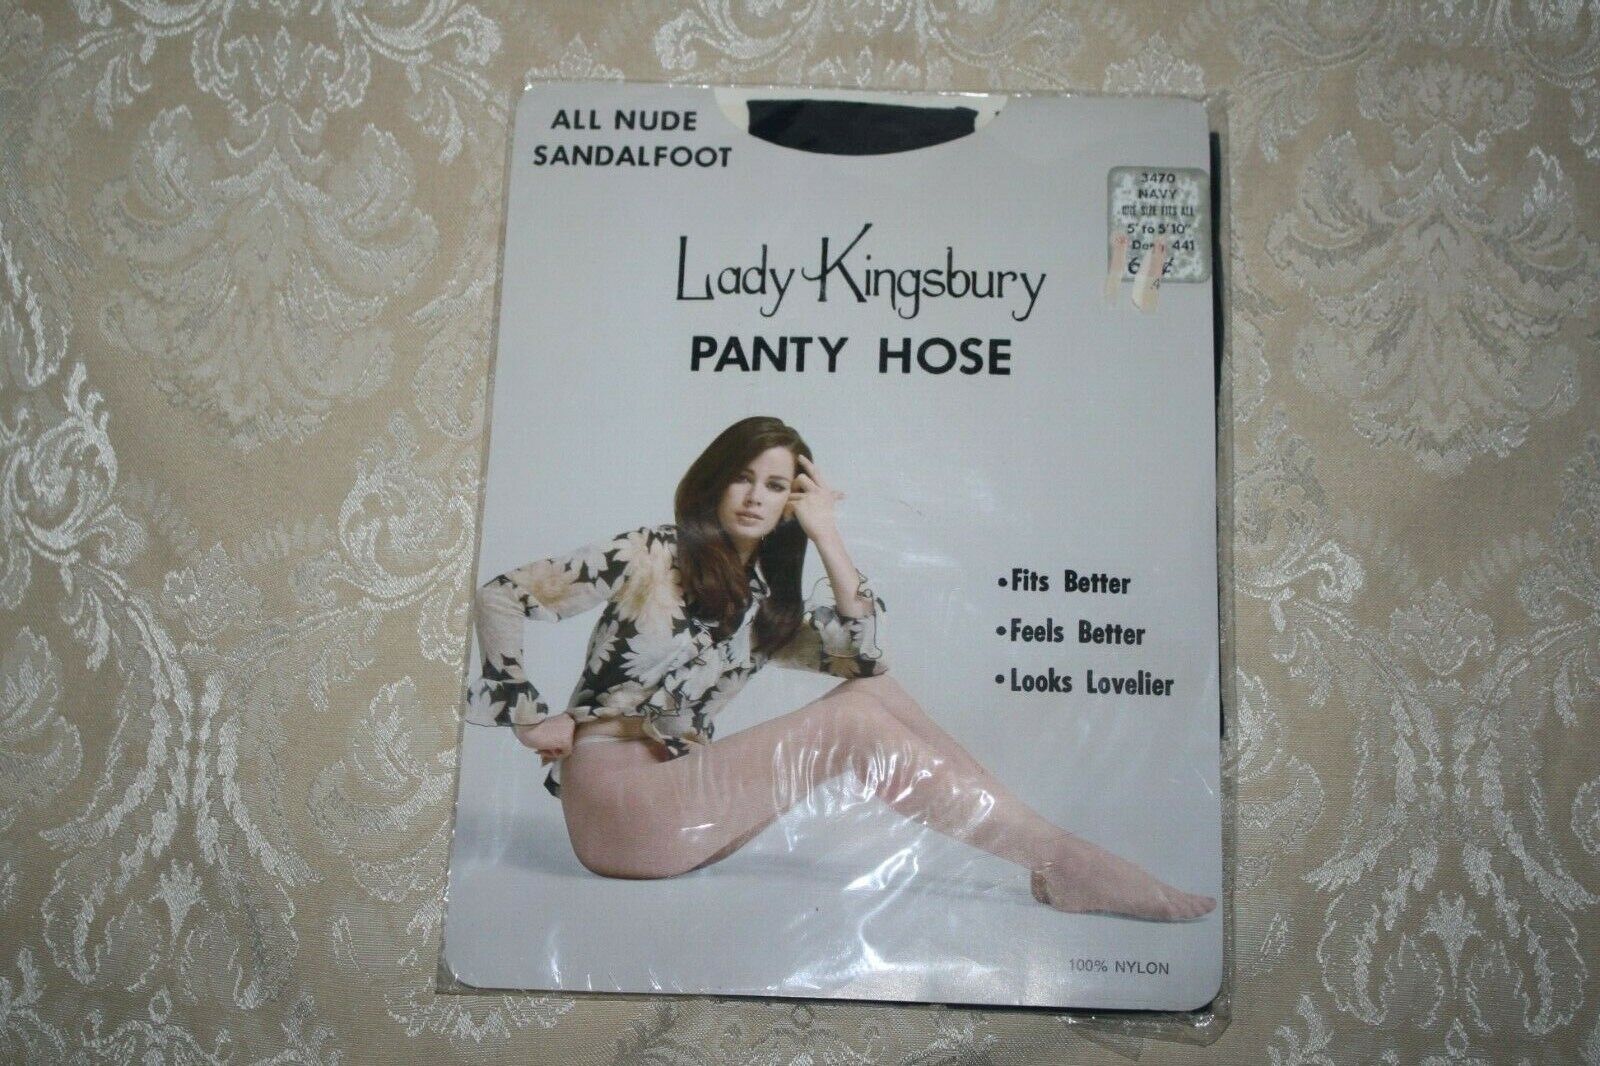 1 Pair LADY KINGSBURY Navy PANTY HOSE Nude NYLONS One Under blast sales S All Size Tulsa Mall